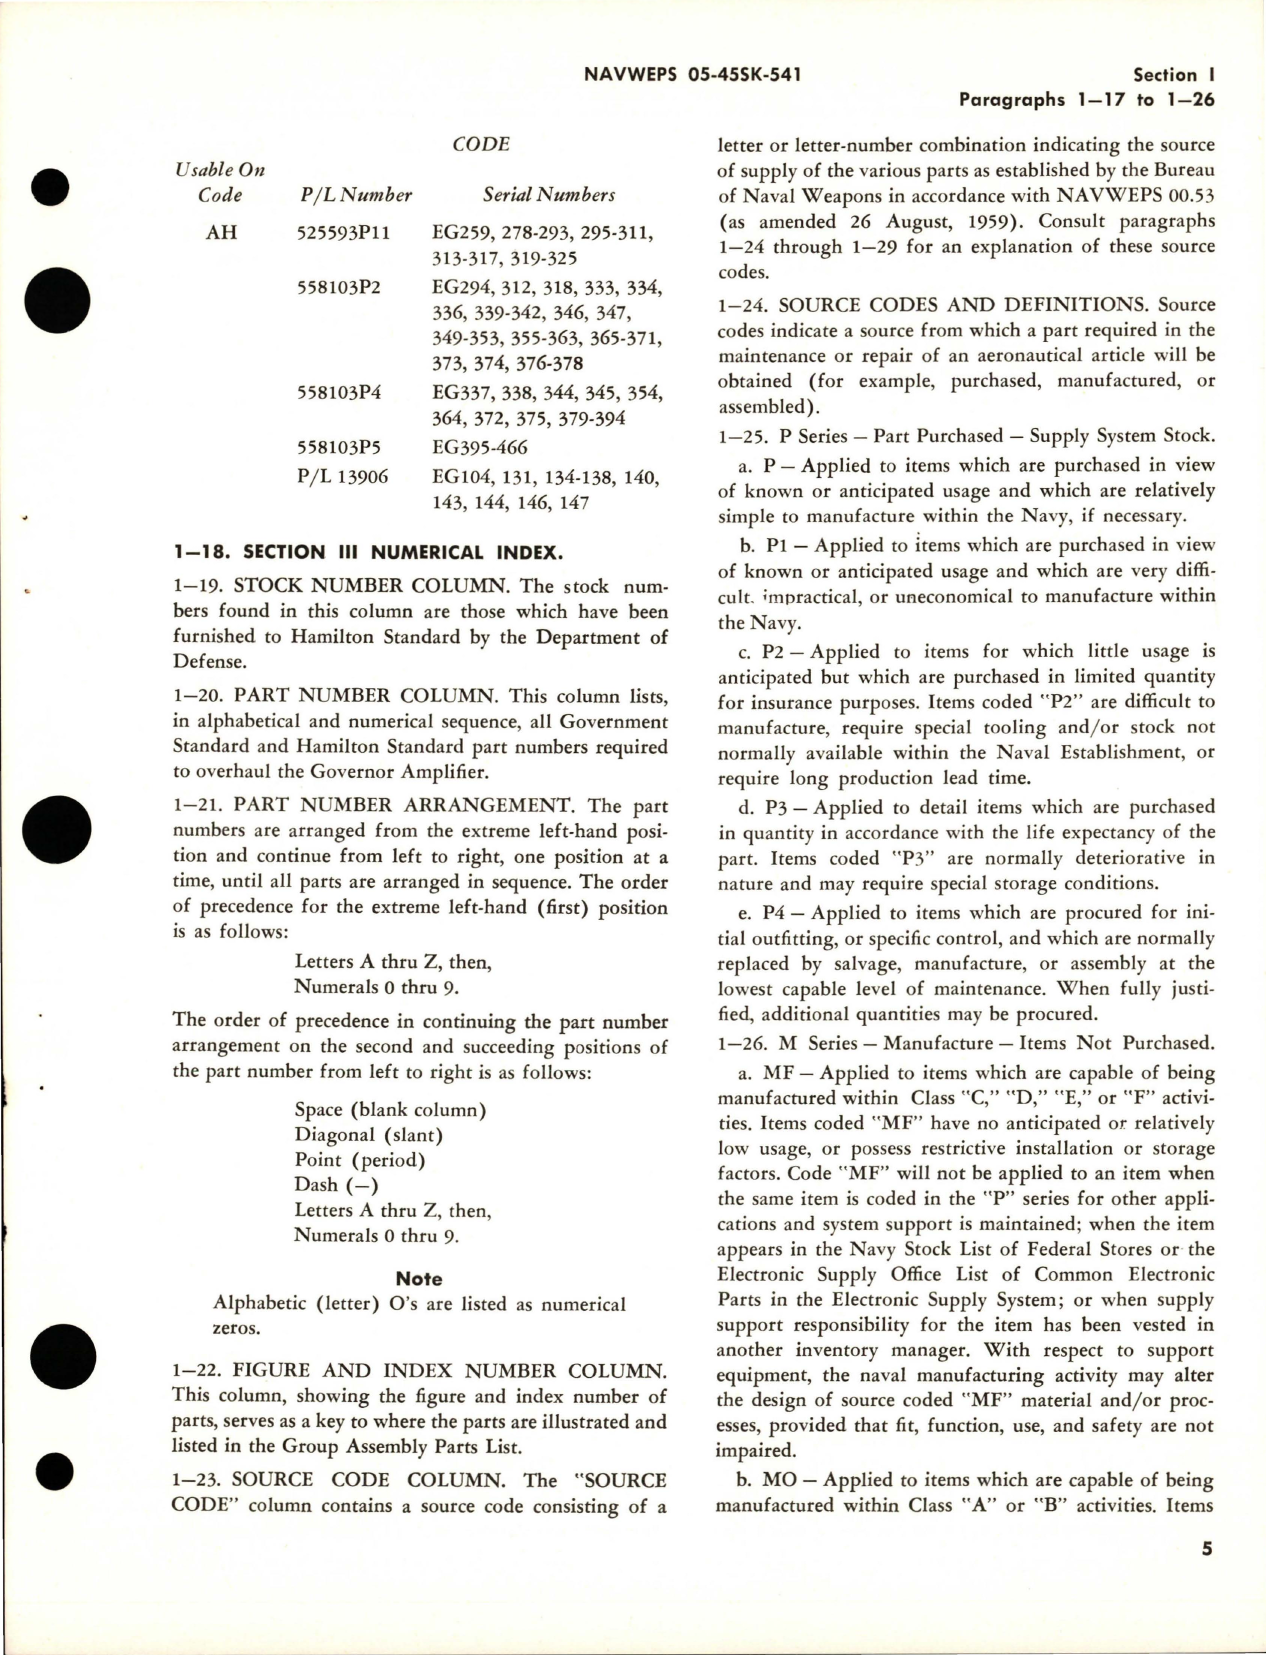 Sample page 7 from AirCorps Library document: Illustrated Parts Breakdown for Governor Amplifier - Parts 525593 and 558103